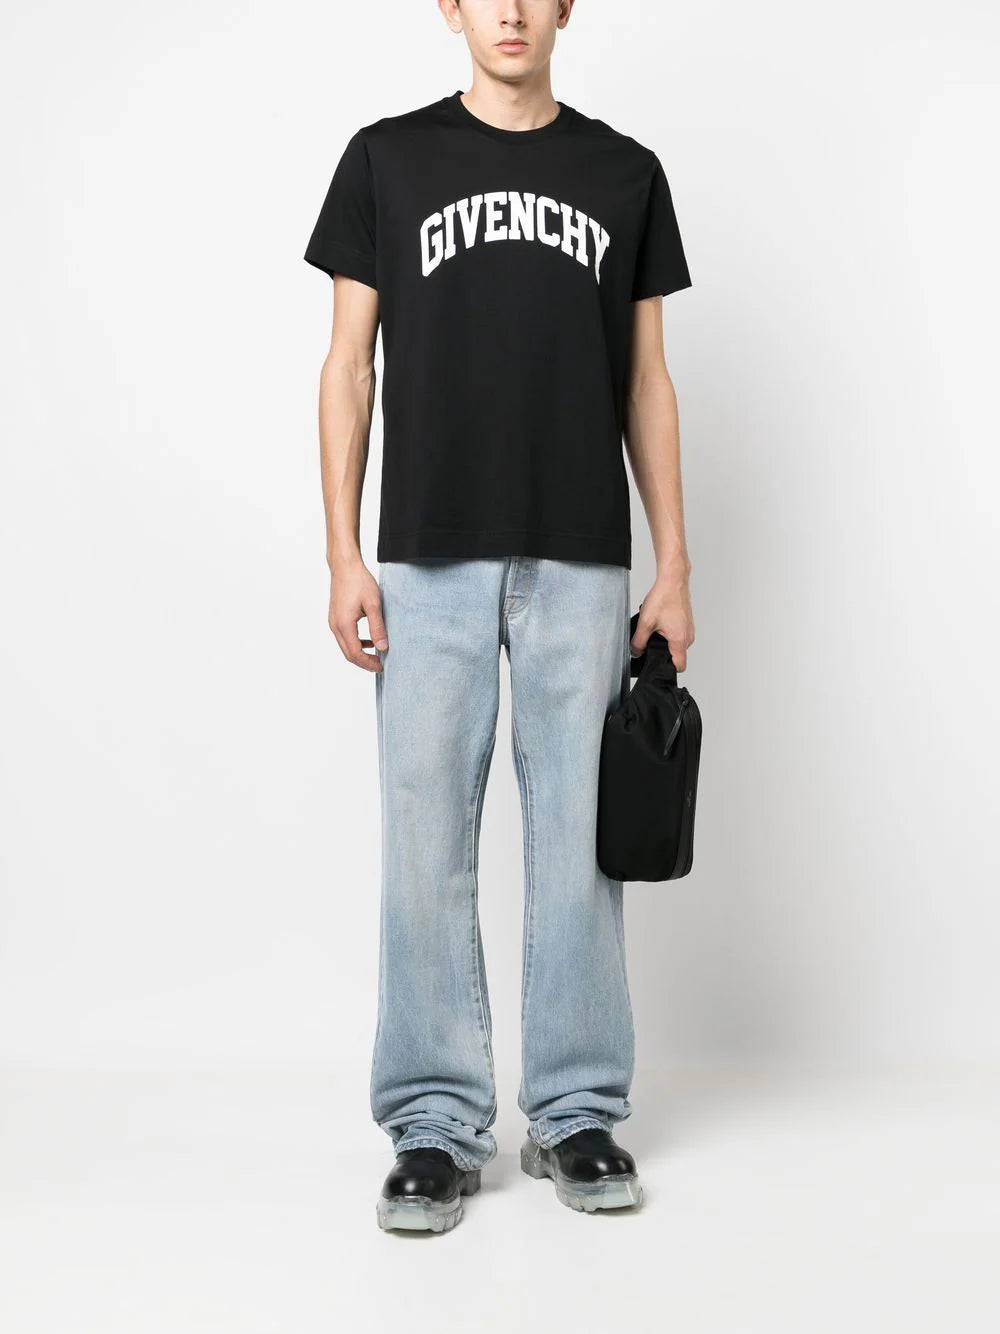 Givenchy College logo printed T-shirt in Black